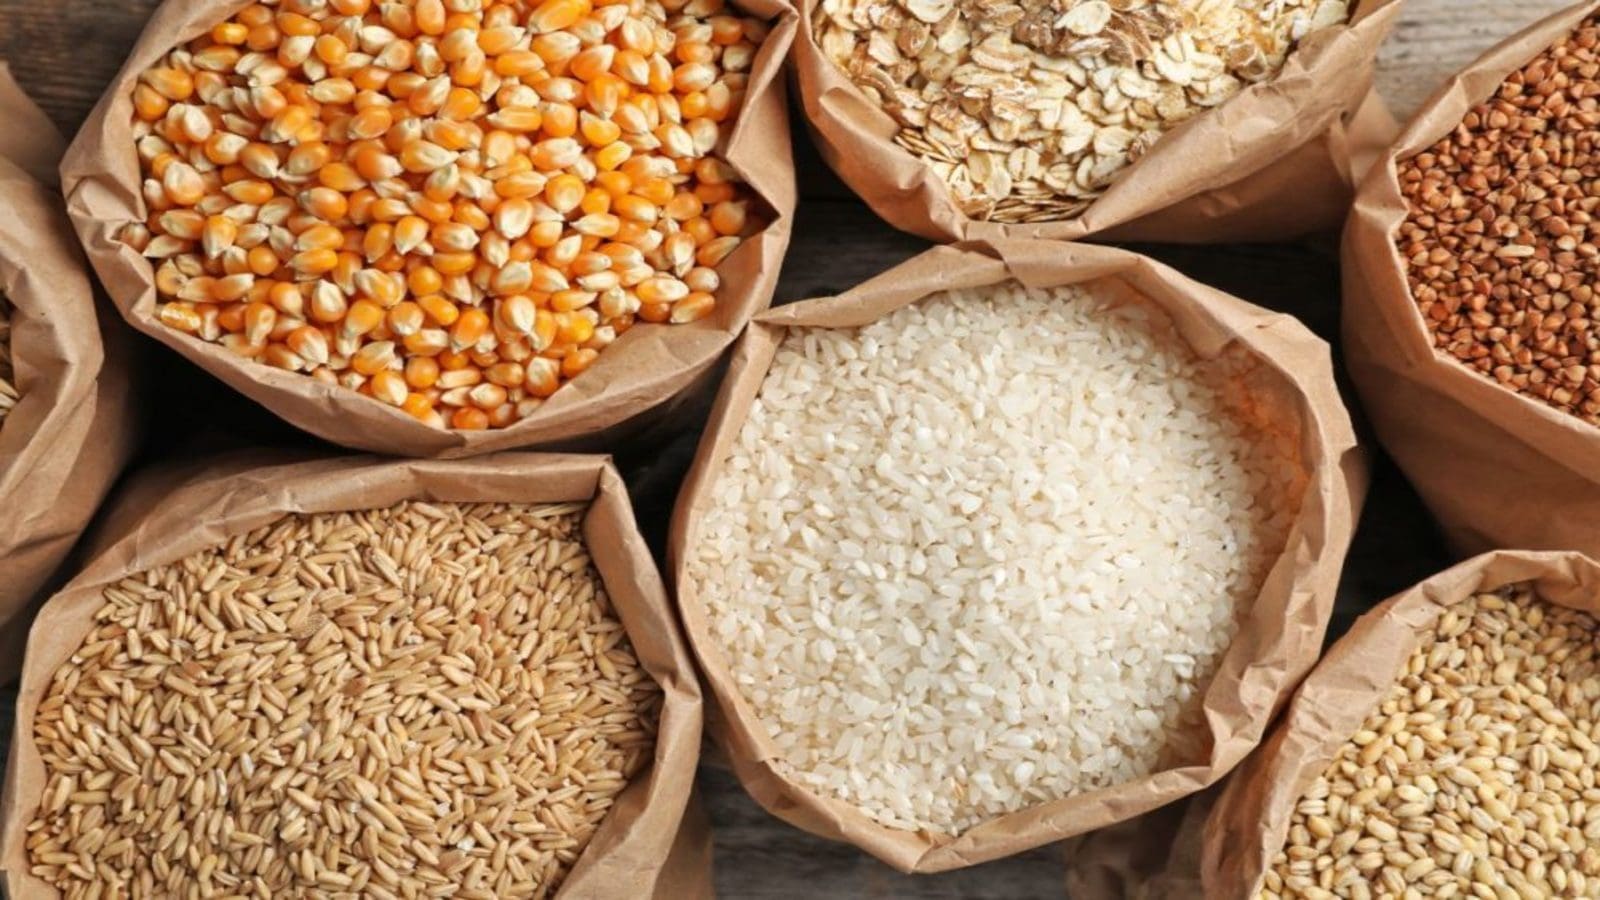 Mali cereal production projected to hit 10.9 million tonnes in 2023/24